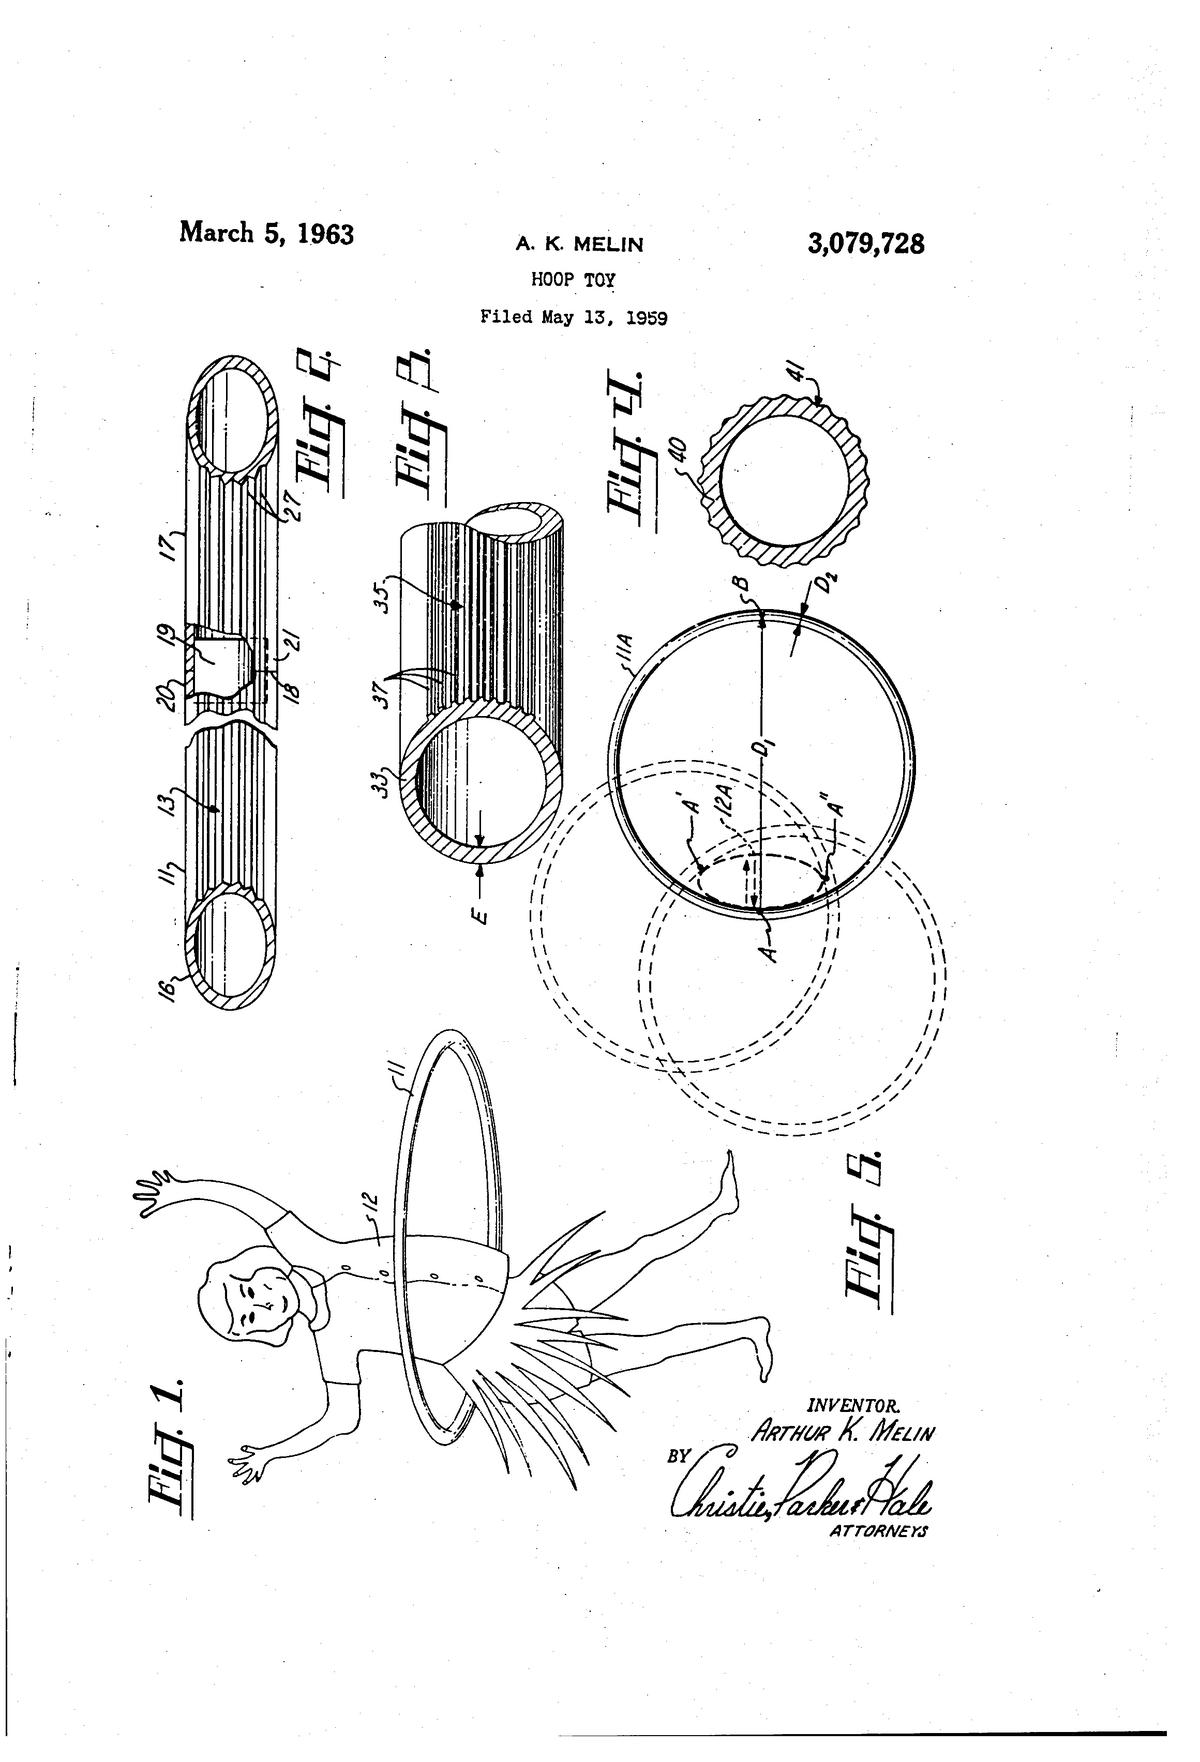 The patent drawings used for the Hula-Hoop. Melin’s name is mentioned as the inventor. 